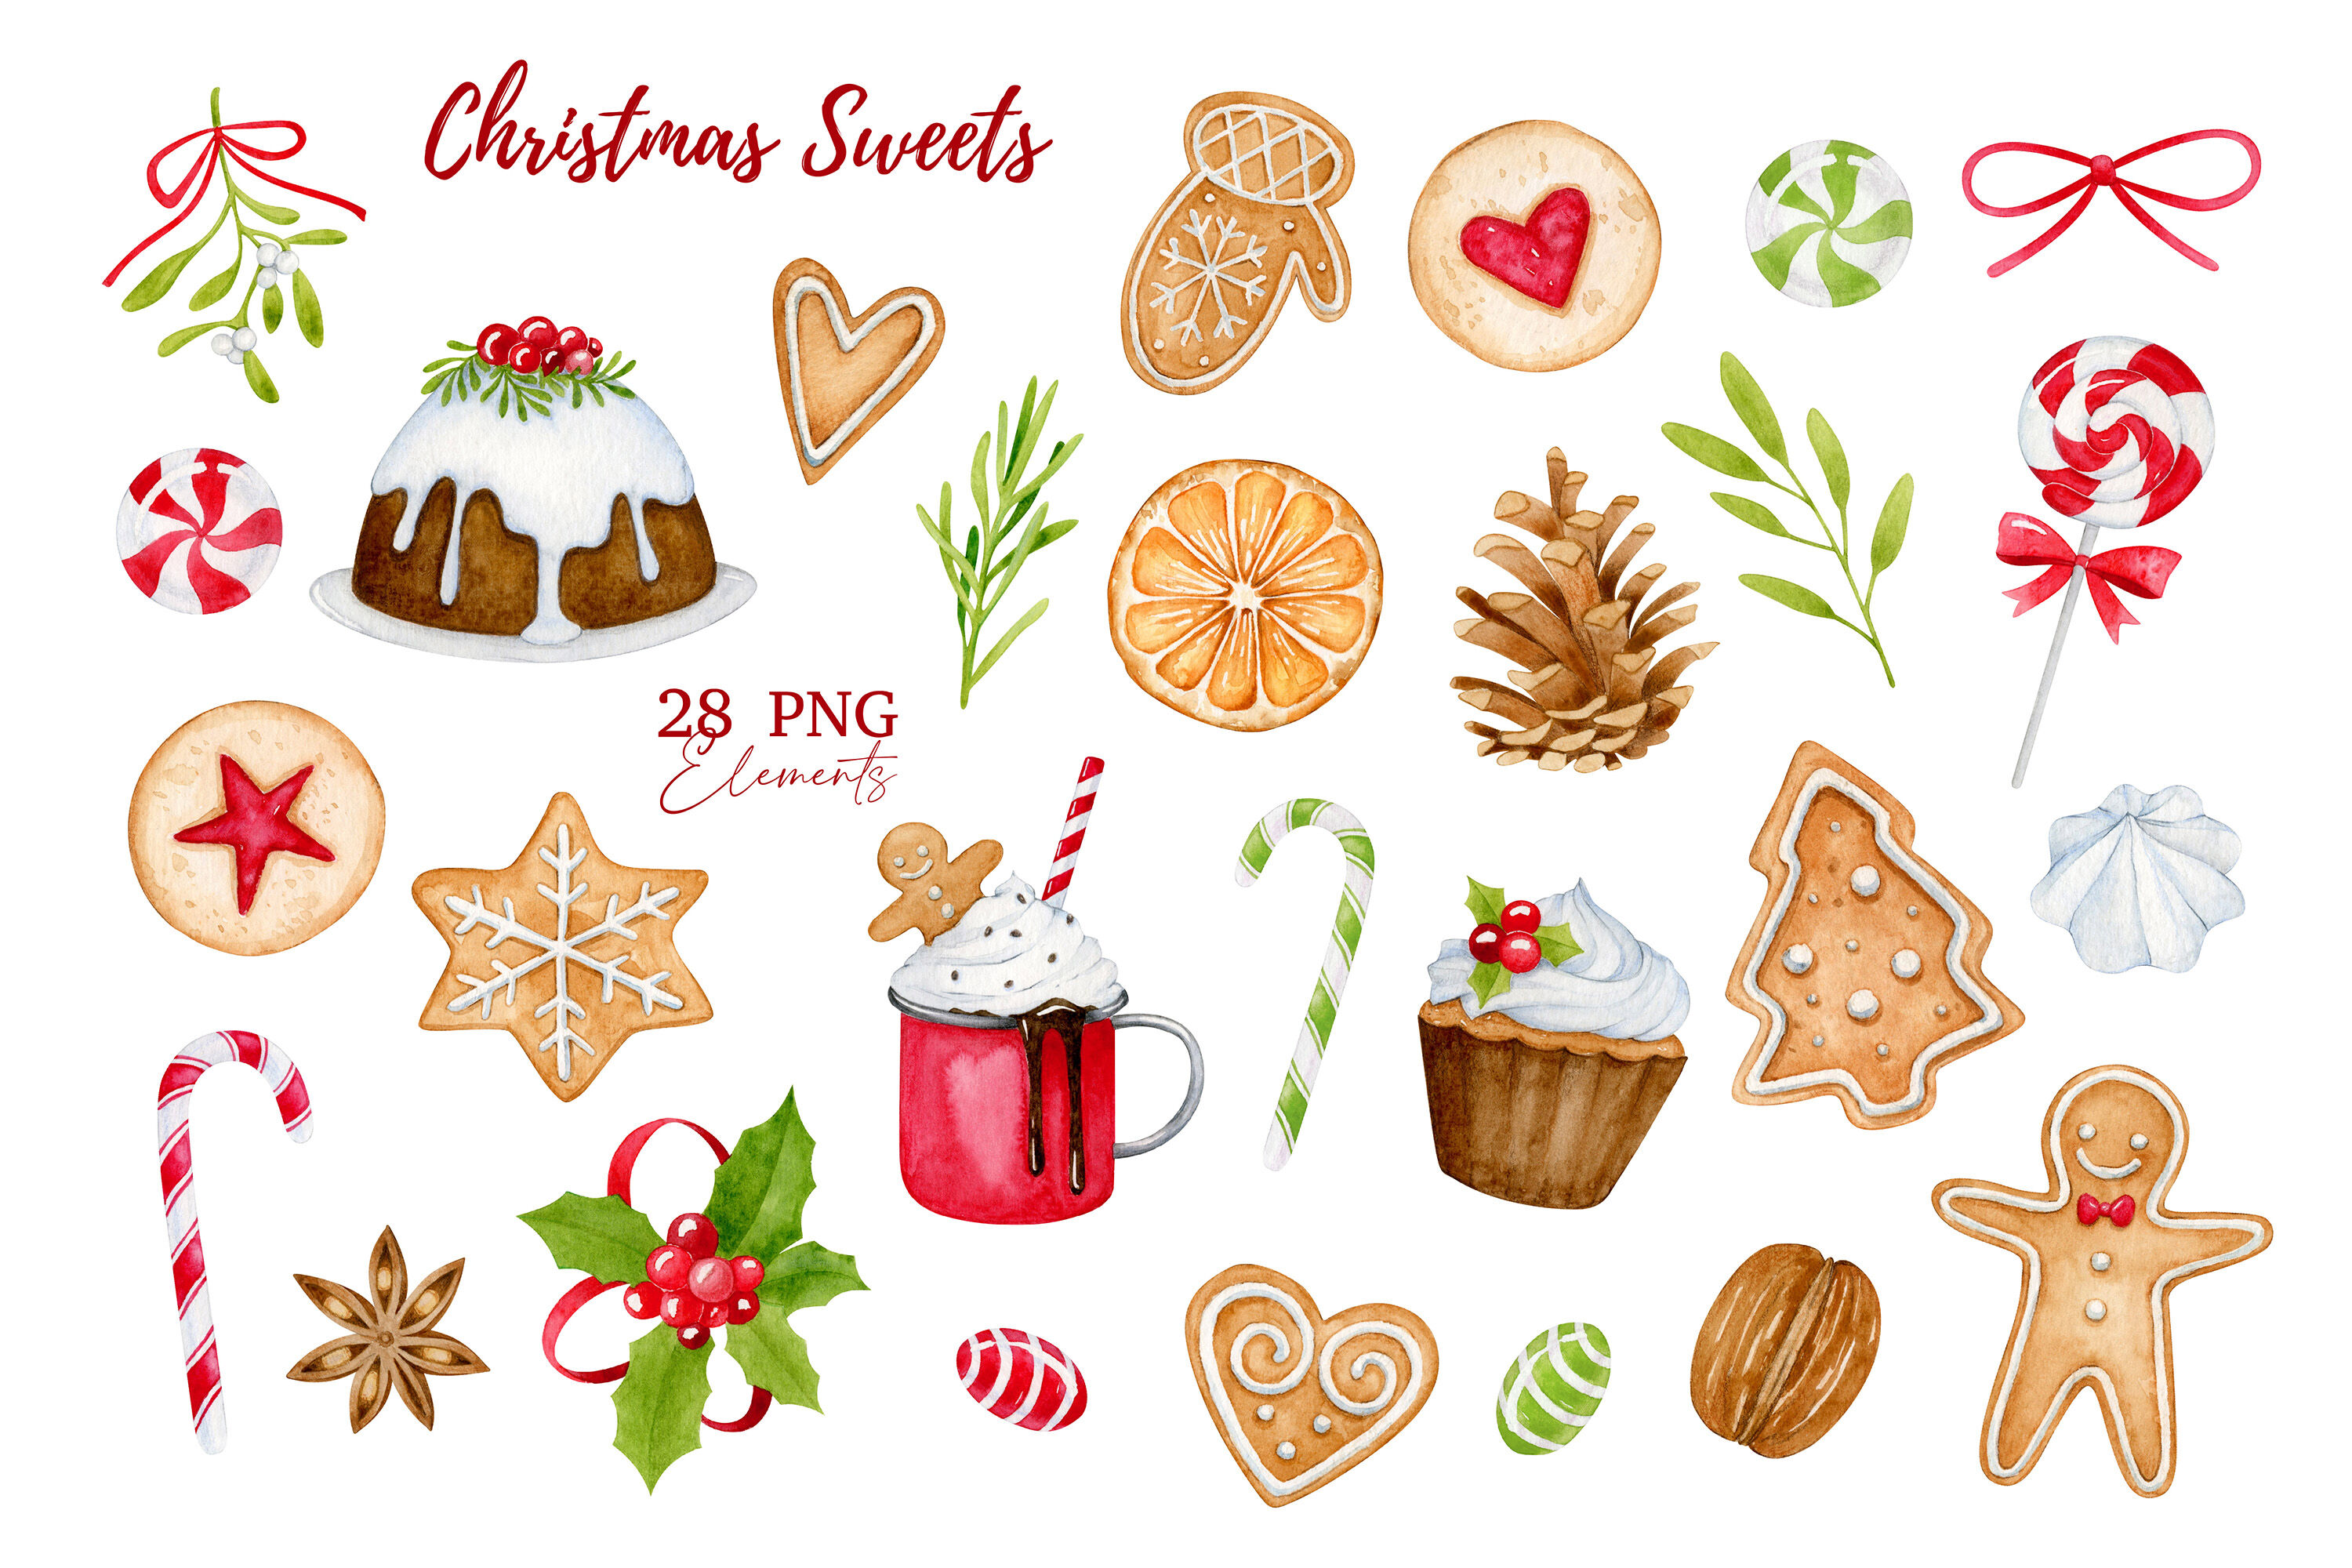 Watercolor christmas clipart, Christmas sweets, New Year By ...